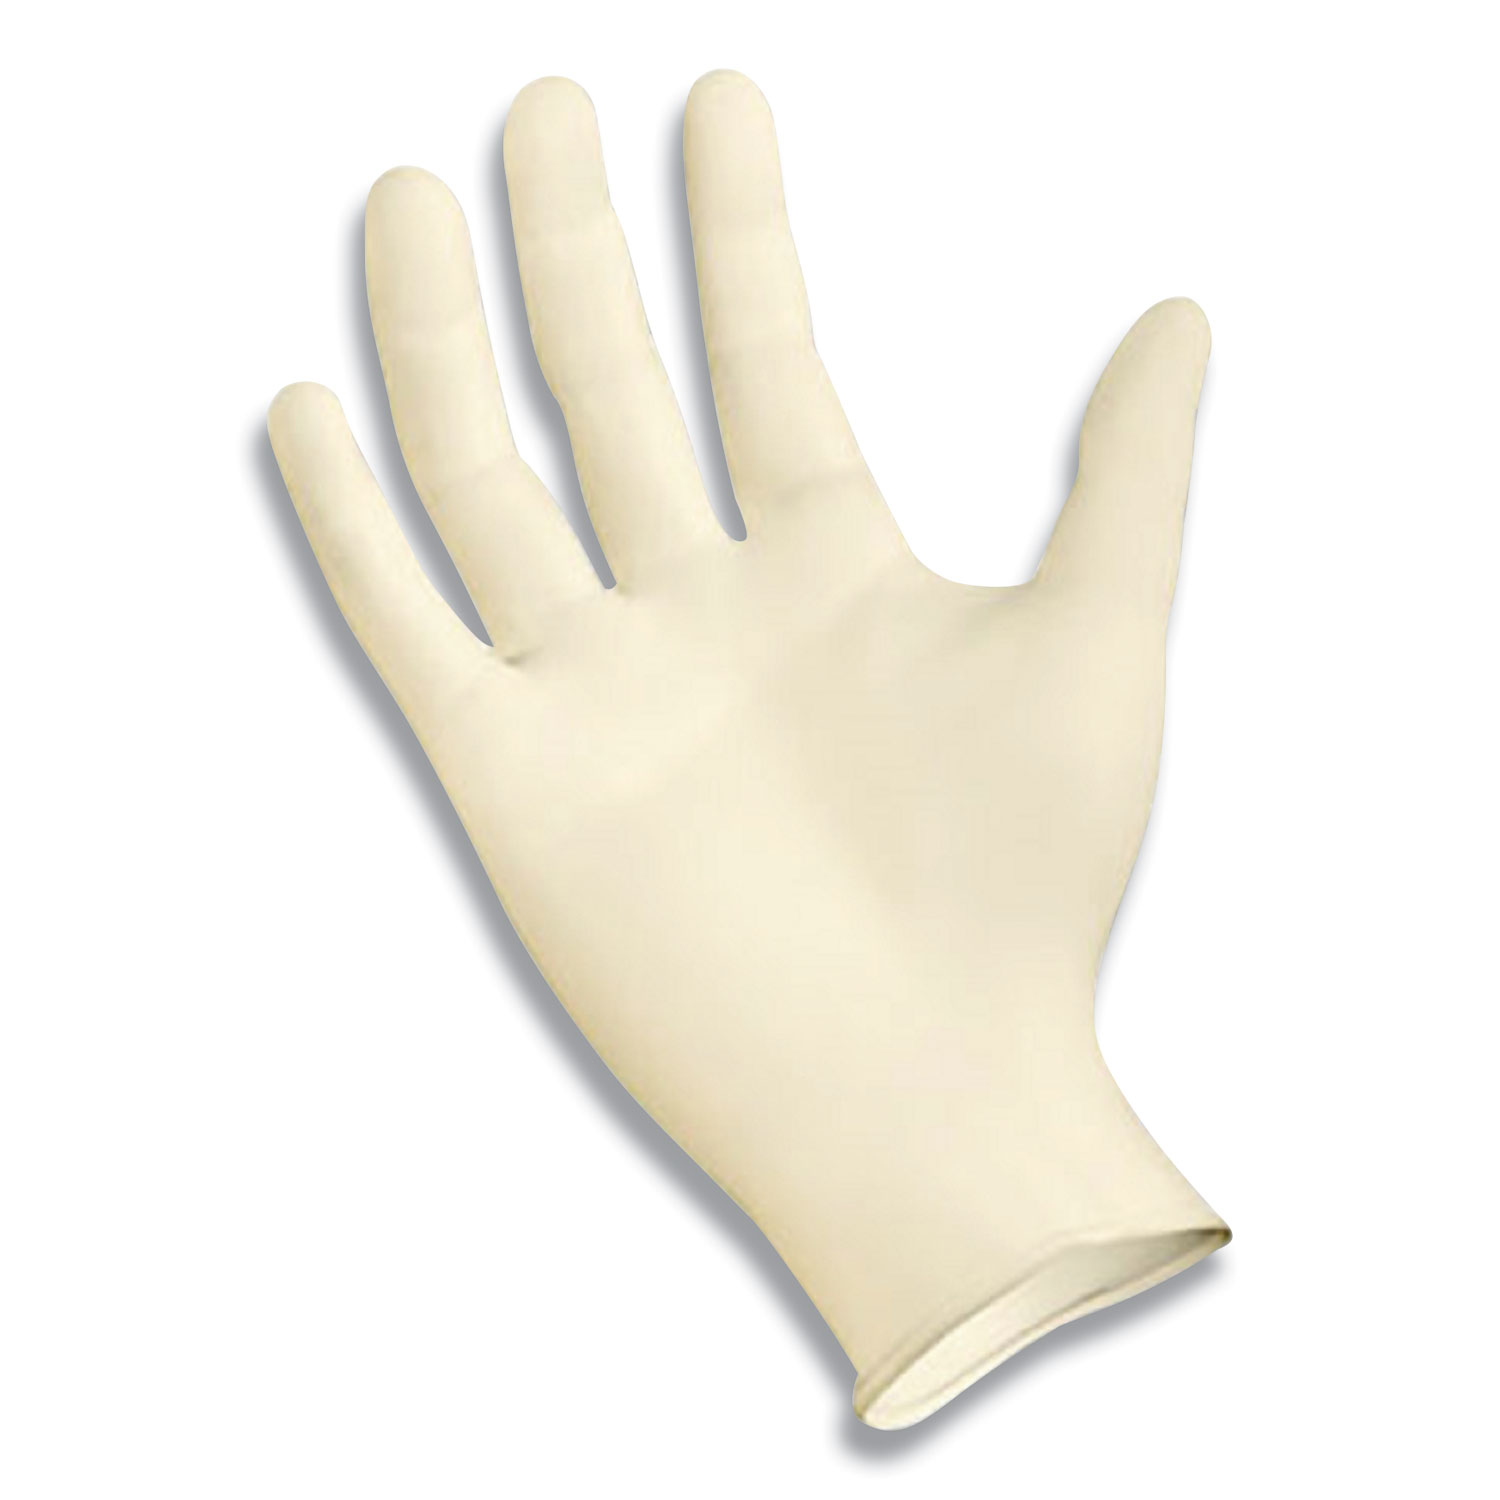  GN1 310LCT Powder-Free Synthetic Examination Vinyl Gloves, Large, Cream, 1,000/Carton (GN1310LCT) 